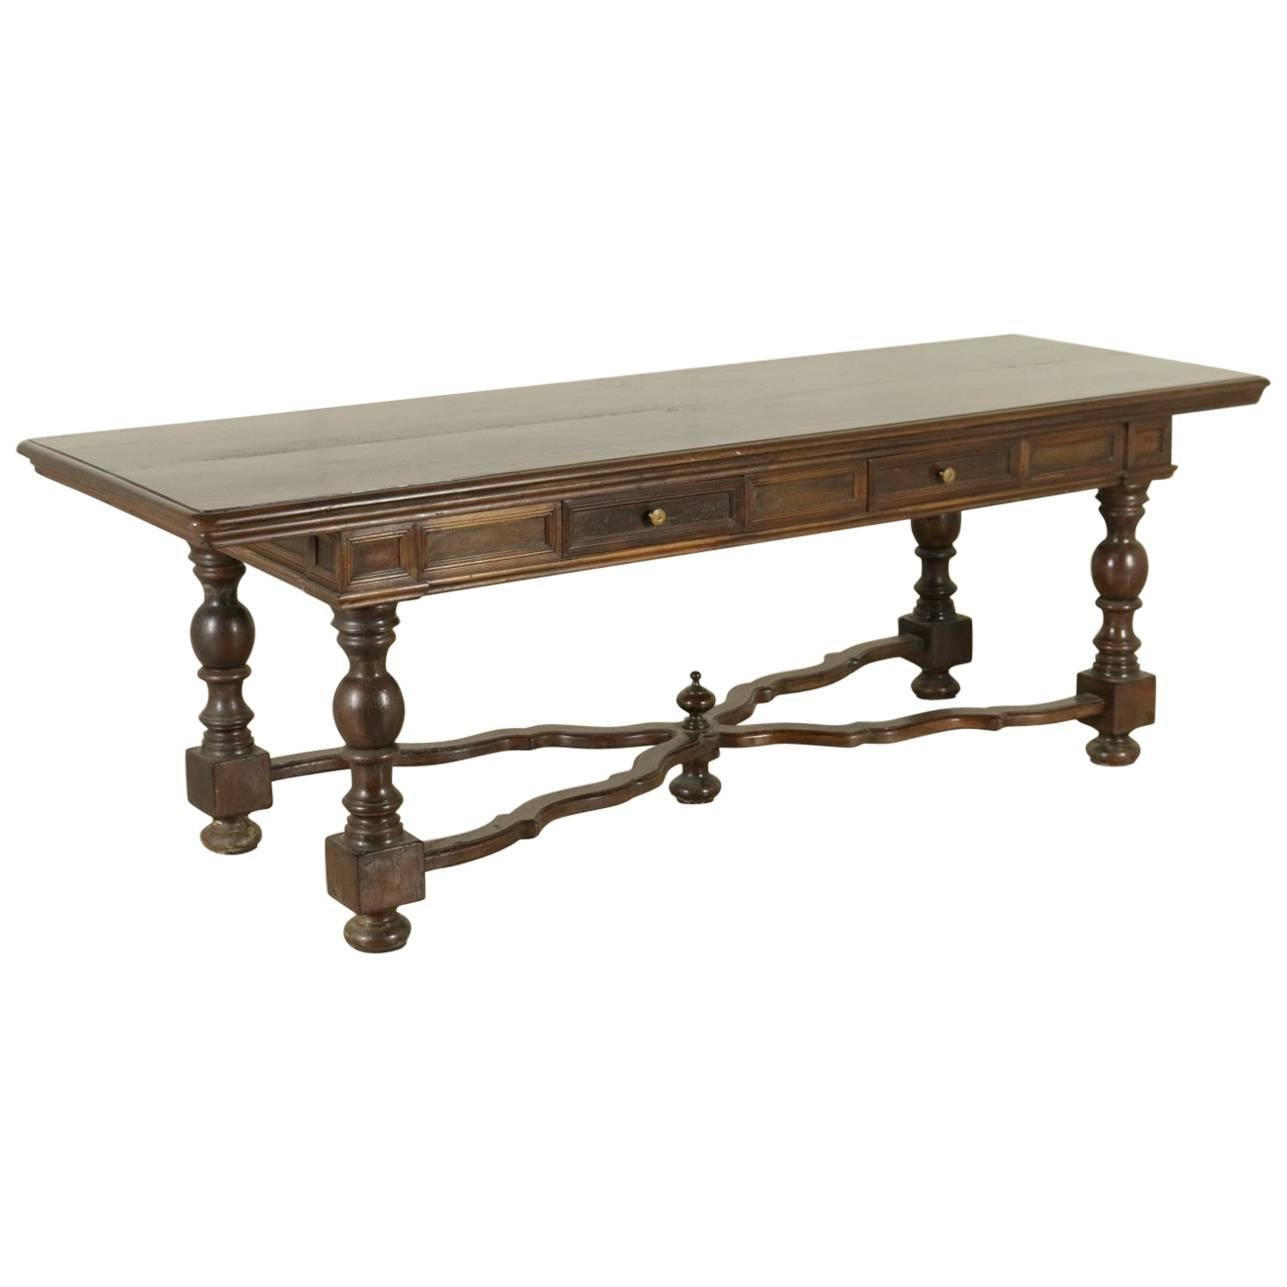 Large Walnut Table Turned Legs and Shaped Cross Stretcher, Italy, 20th Century